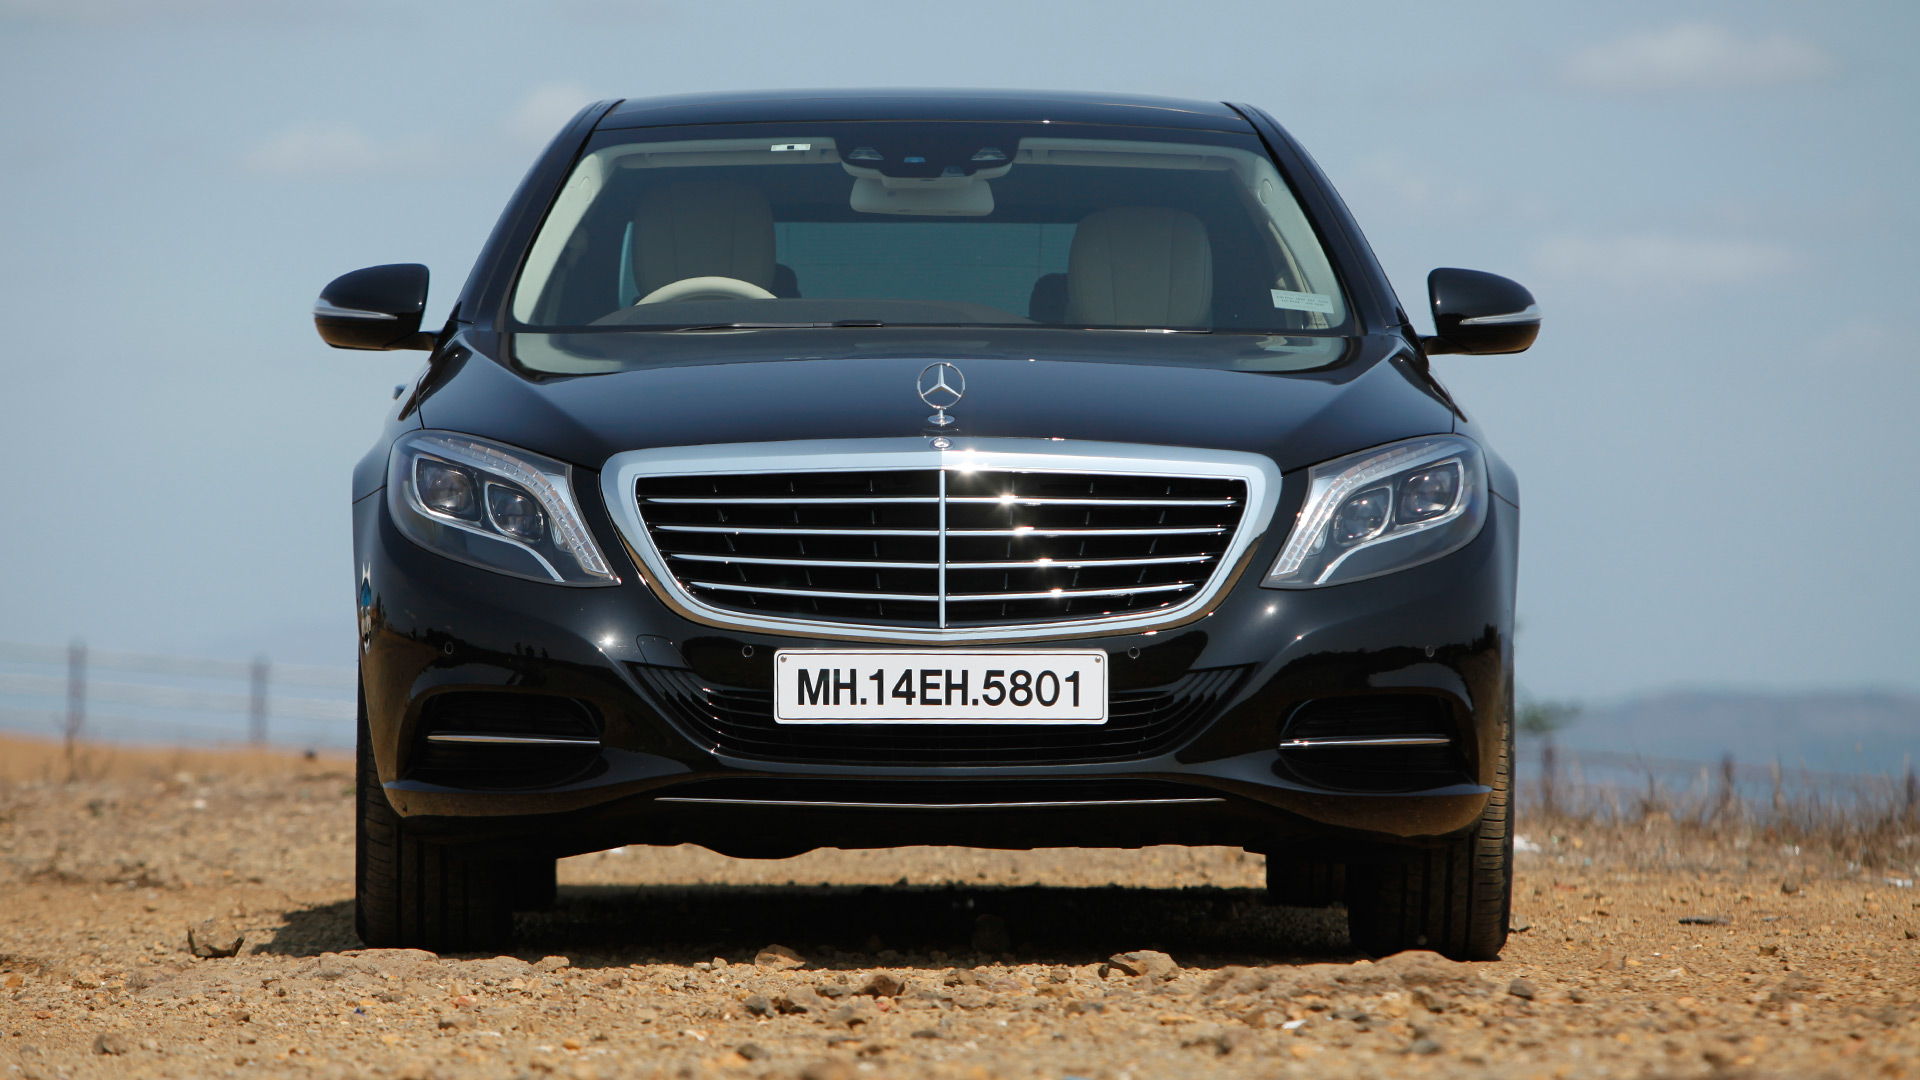 Mercedes-Benz S-Class 2021 S 350d 4MATIC - Price in India, Mileage,  Reviews, Colours, Specification, Images - Overdrive